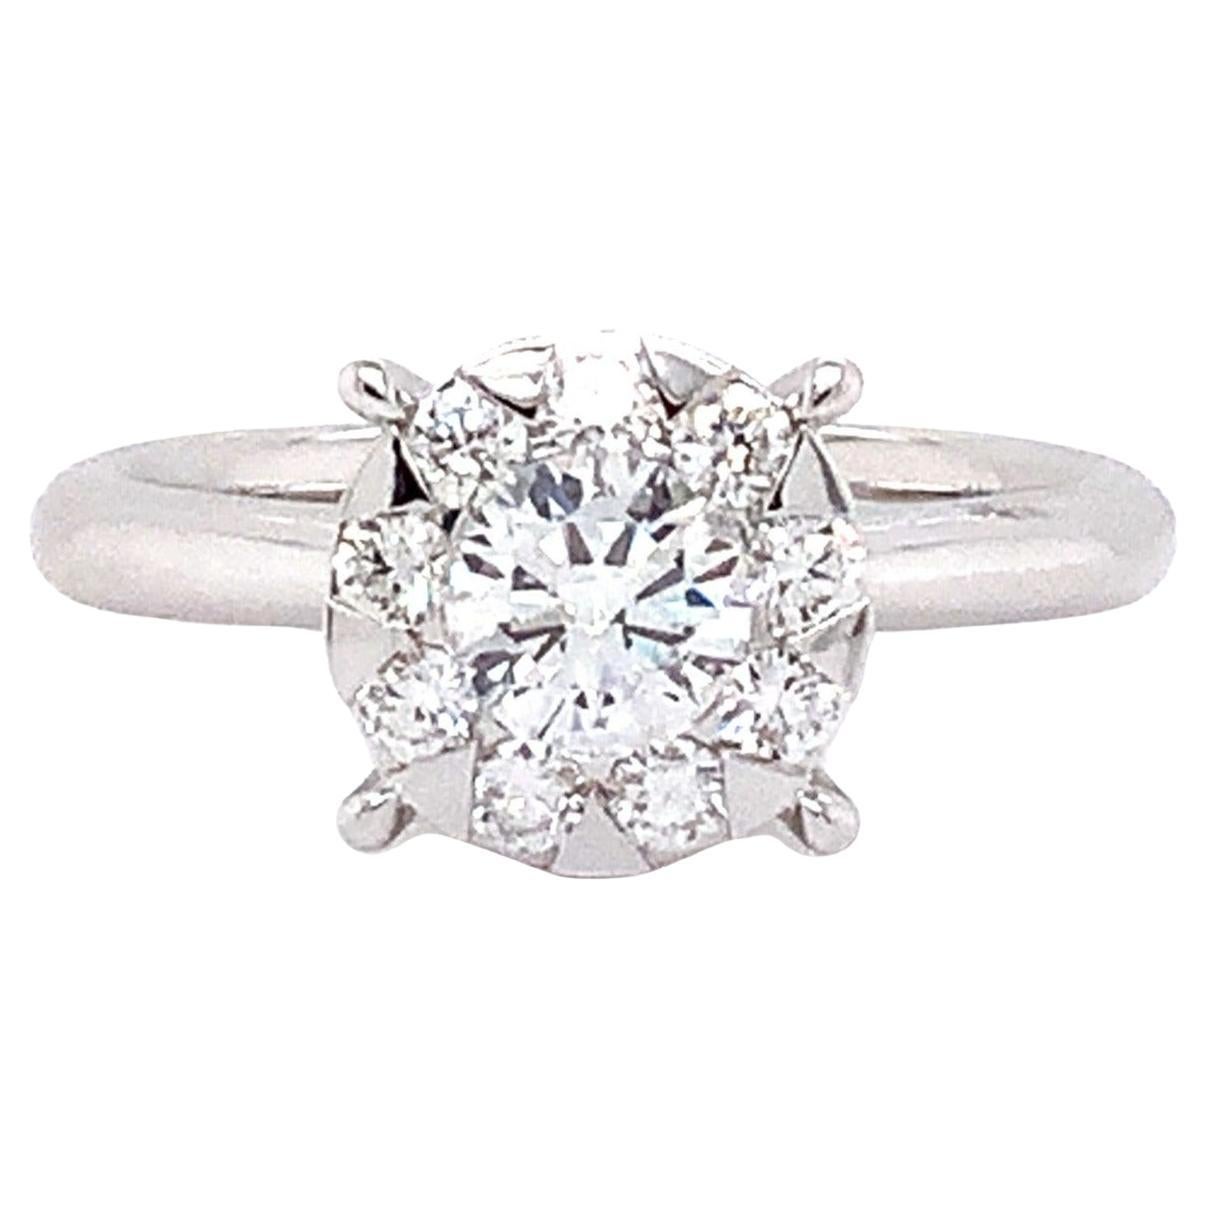 Memoire Bouquets Collection Engagement Diamond Ring 0.87ctw Looks like a 3 Car For Sale